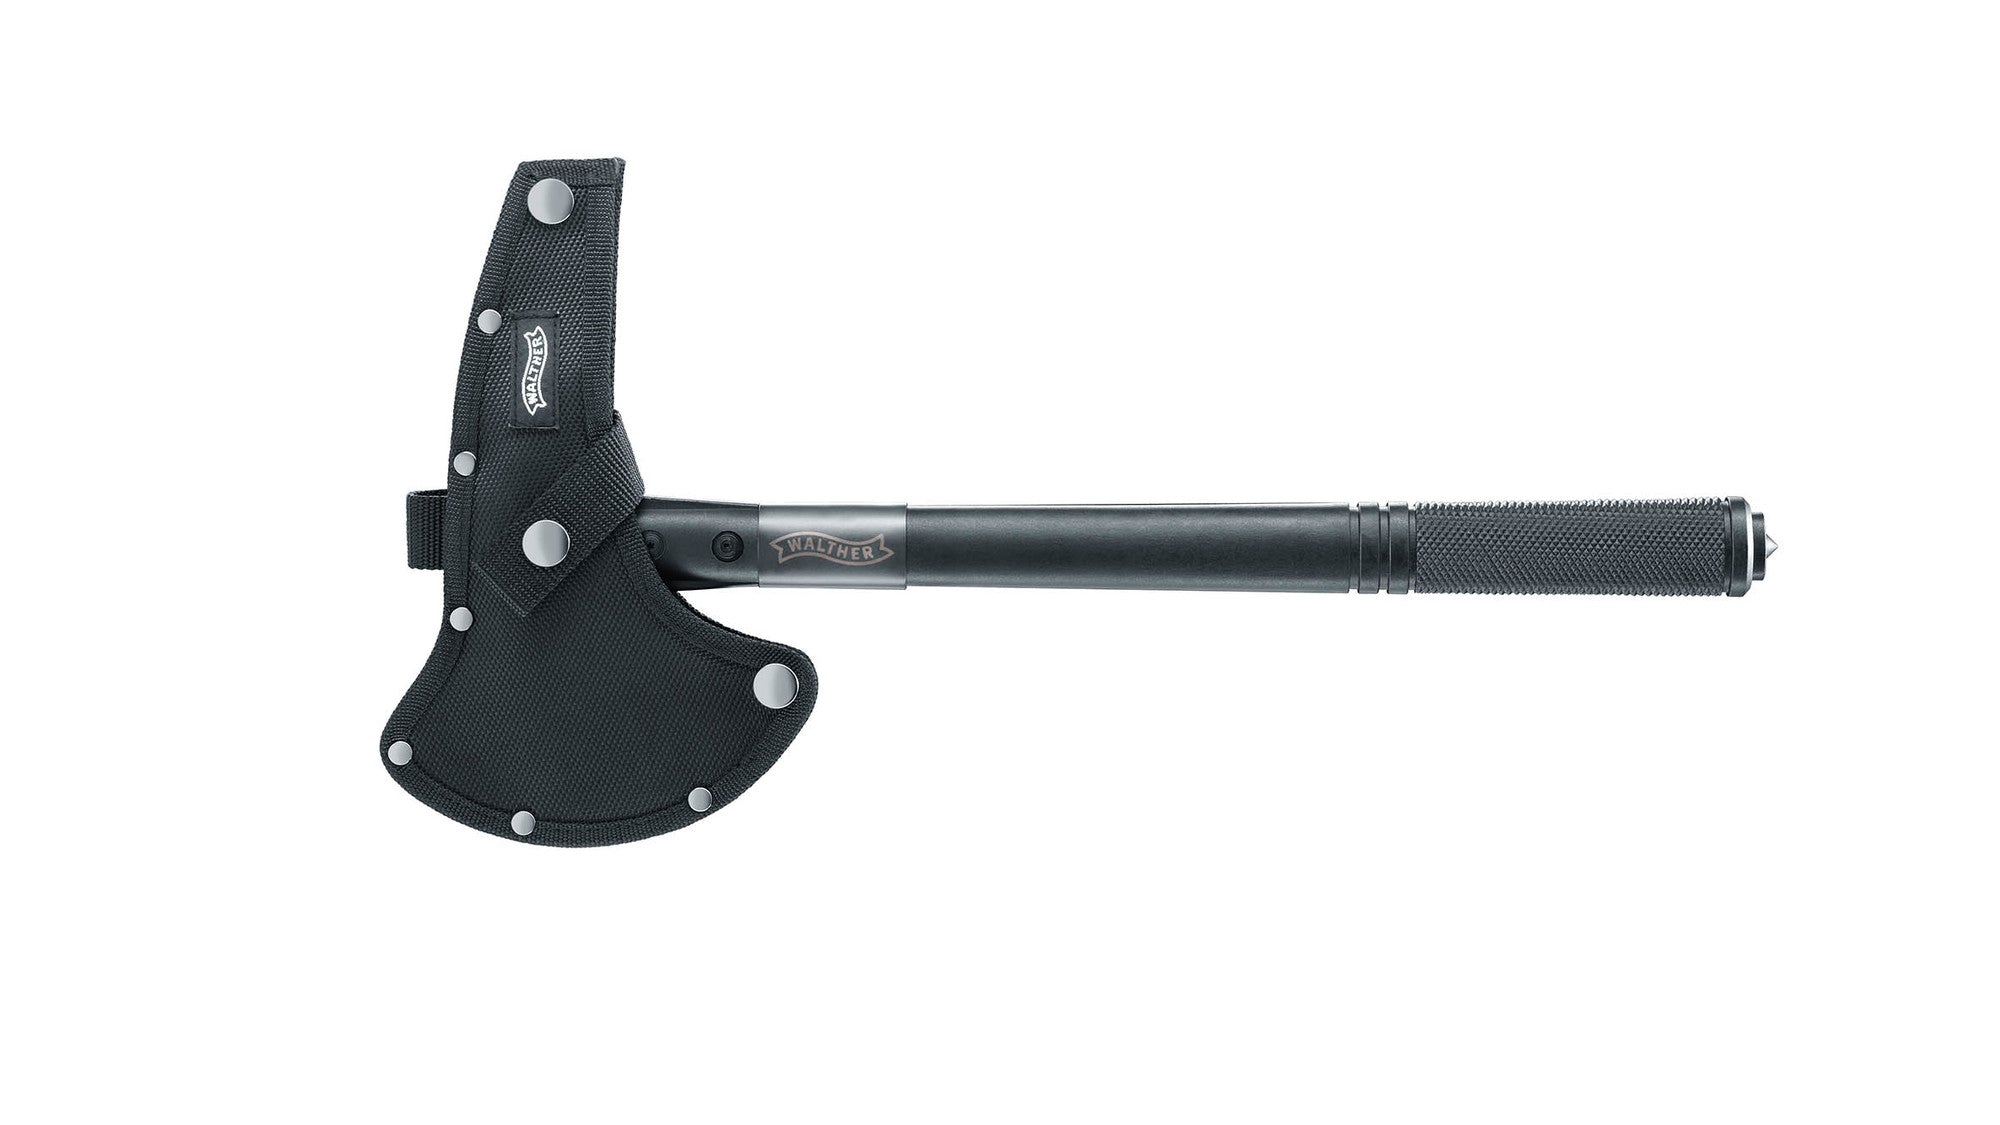 TACTICAL TOMAHAWK 420C STAINLESS